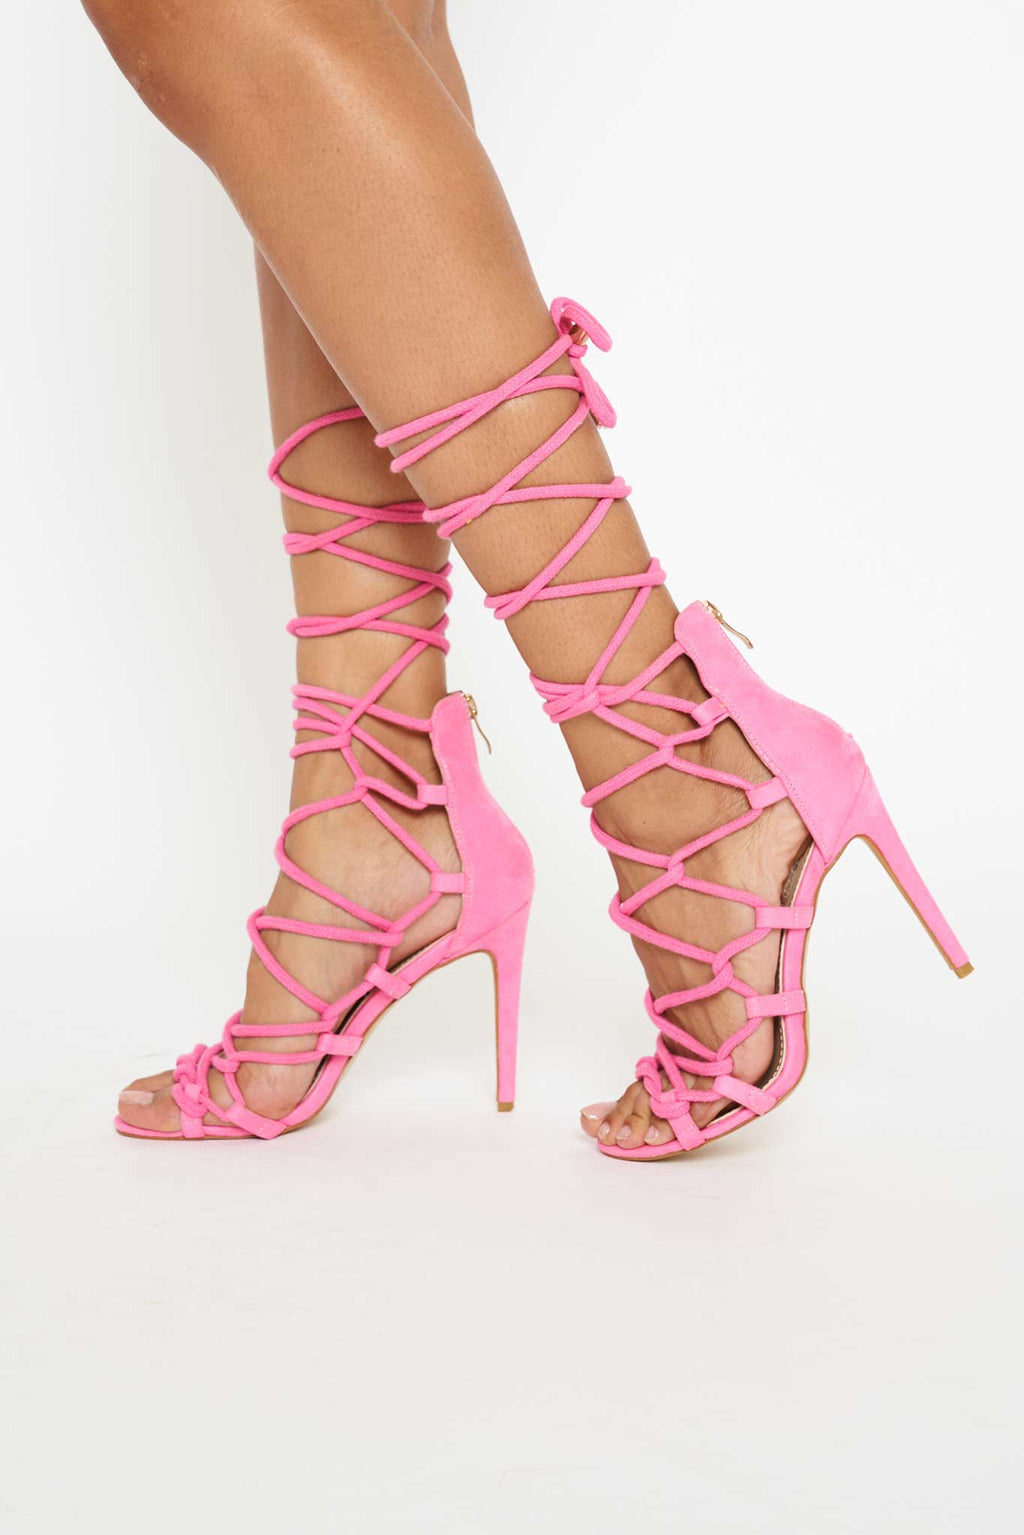 lace up hot pink heels